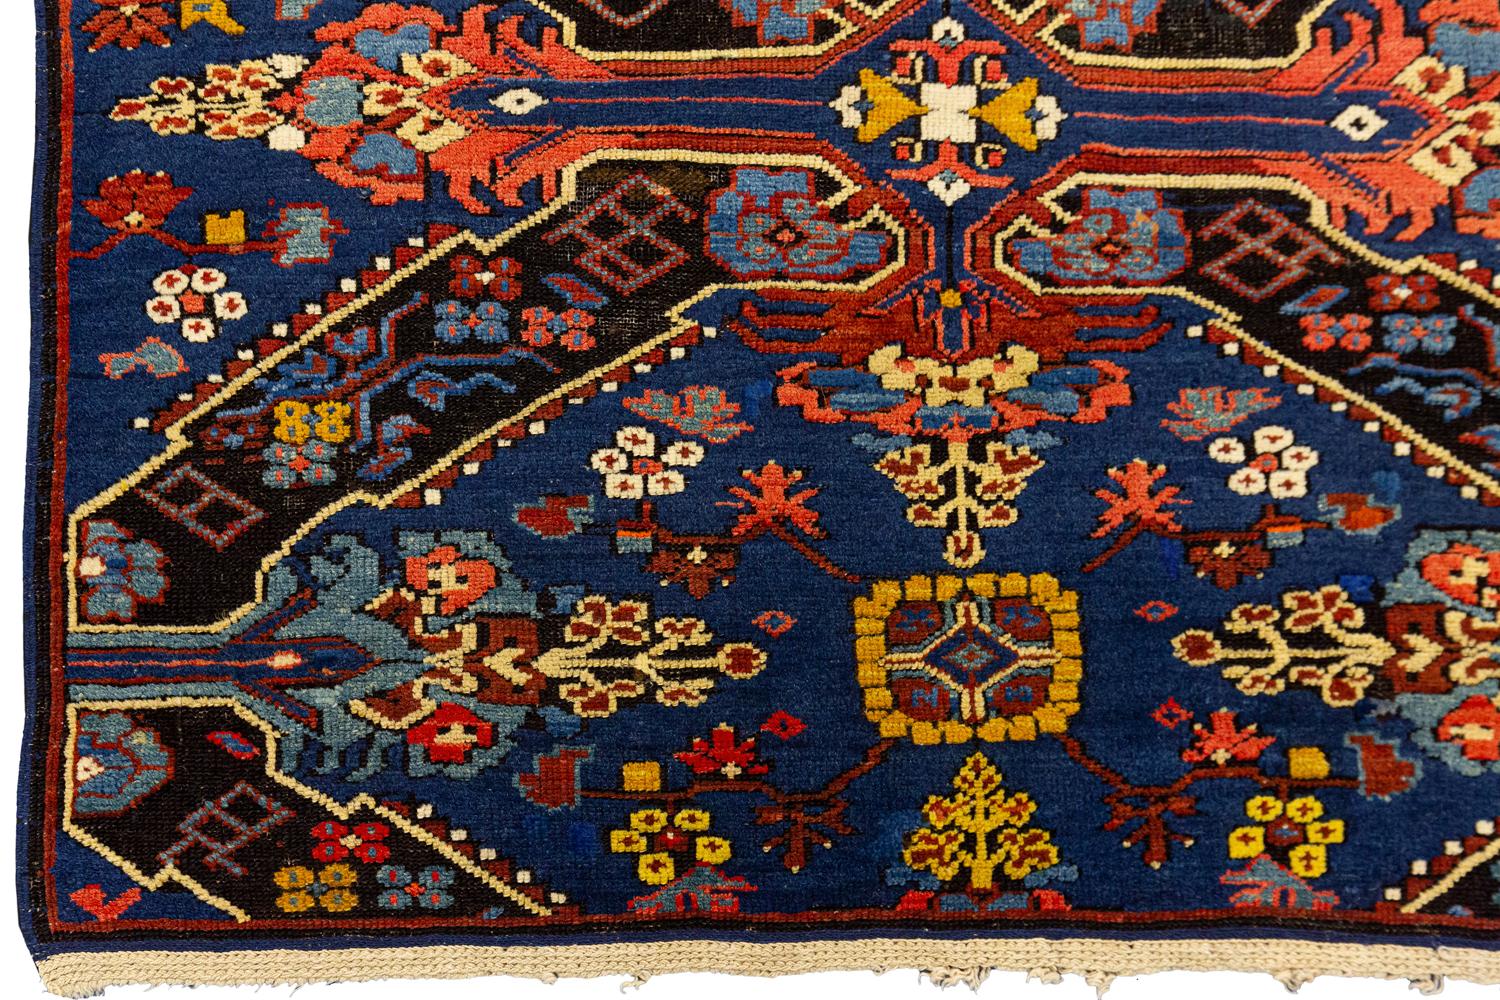 19th Century Seychour with All-Over Field in Rust&Navy Tones Fine Caucasian Rug, 1880-1900